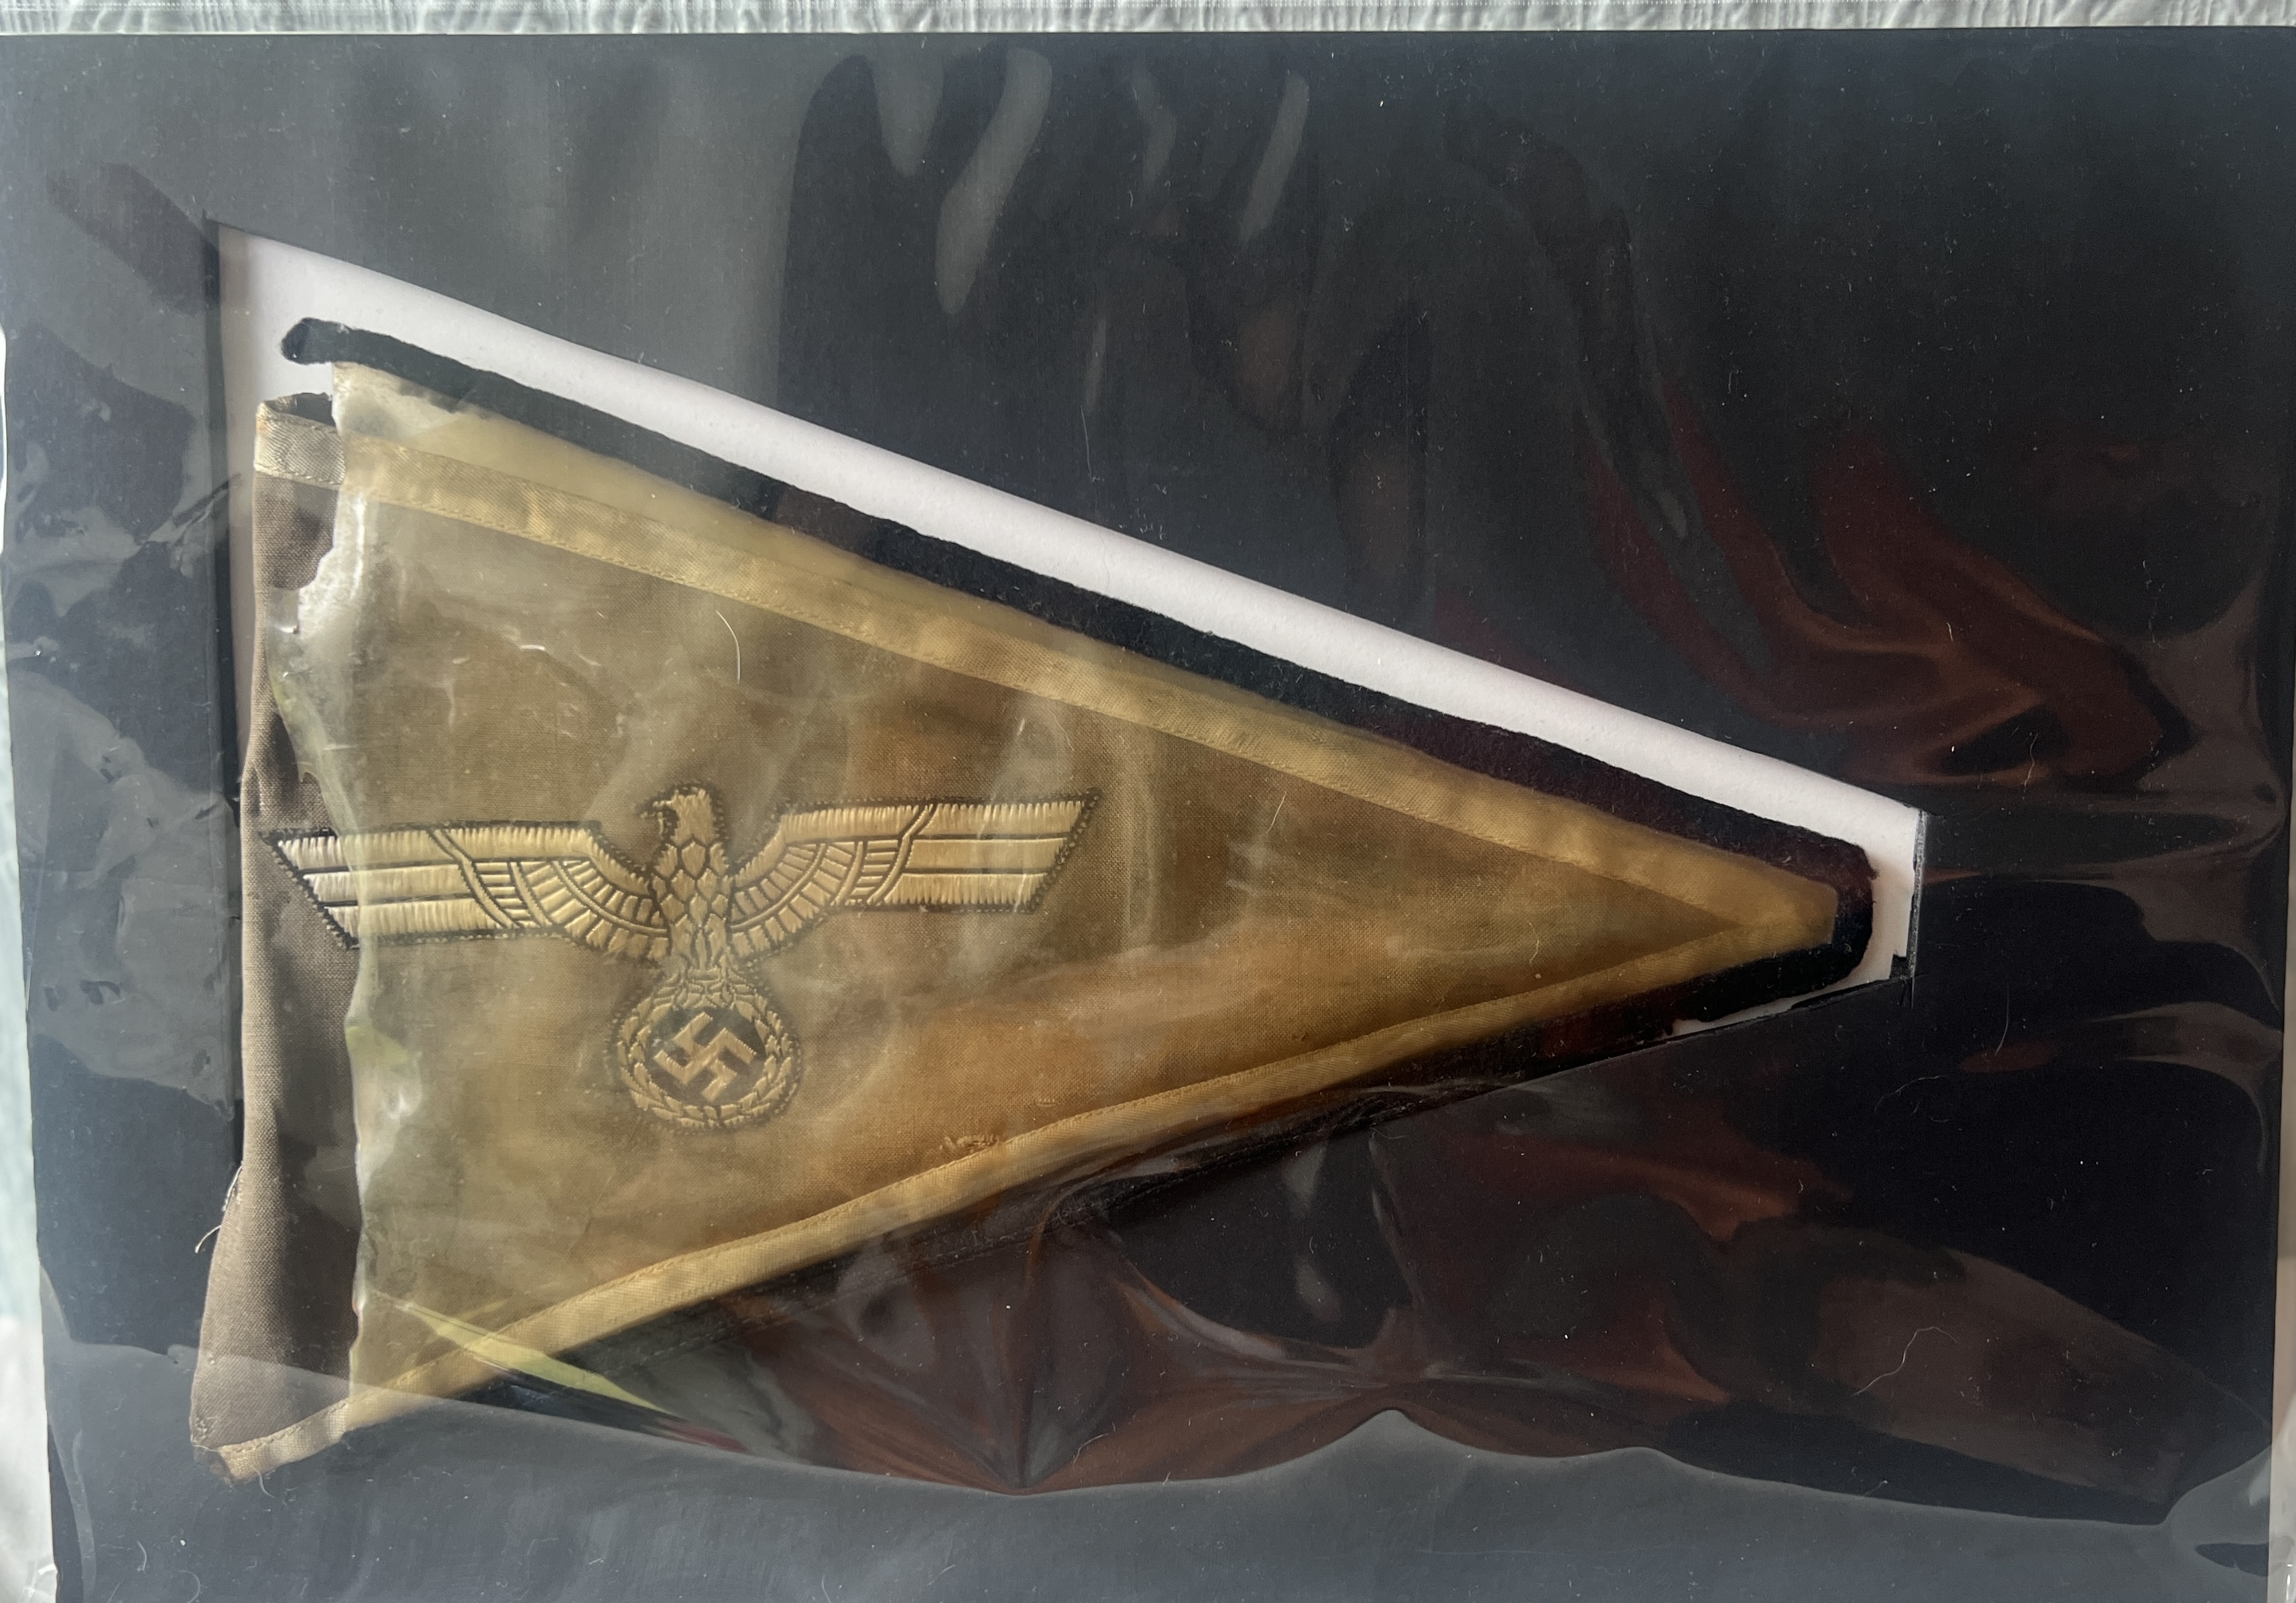 grey triangle, cream eagle and swastika, yellowed clear cover